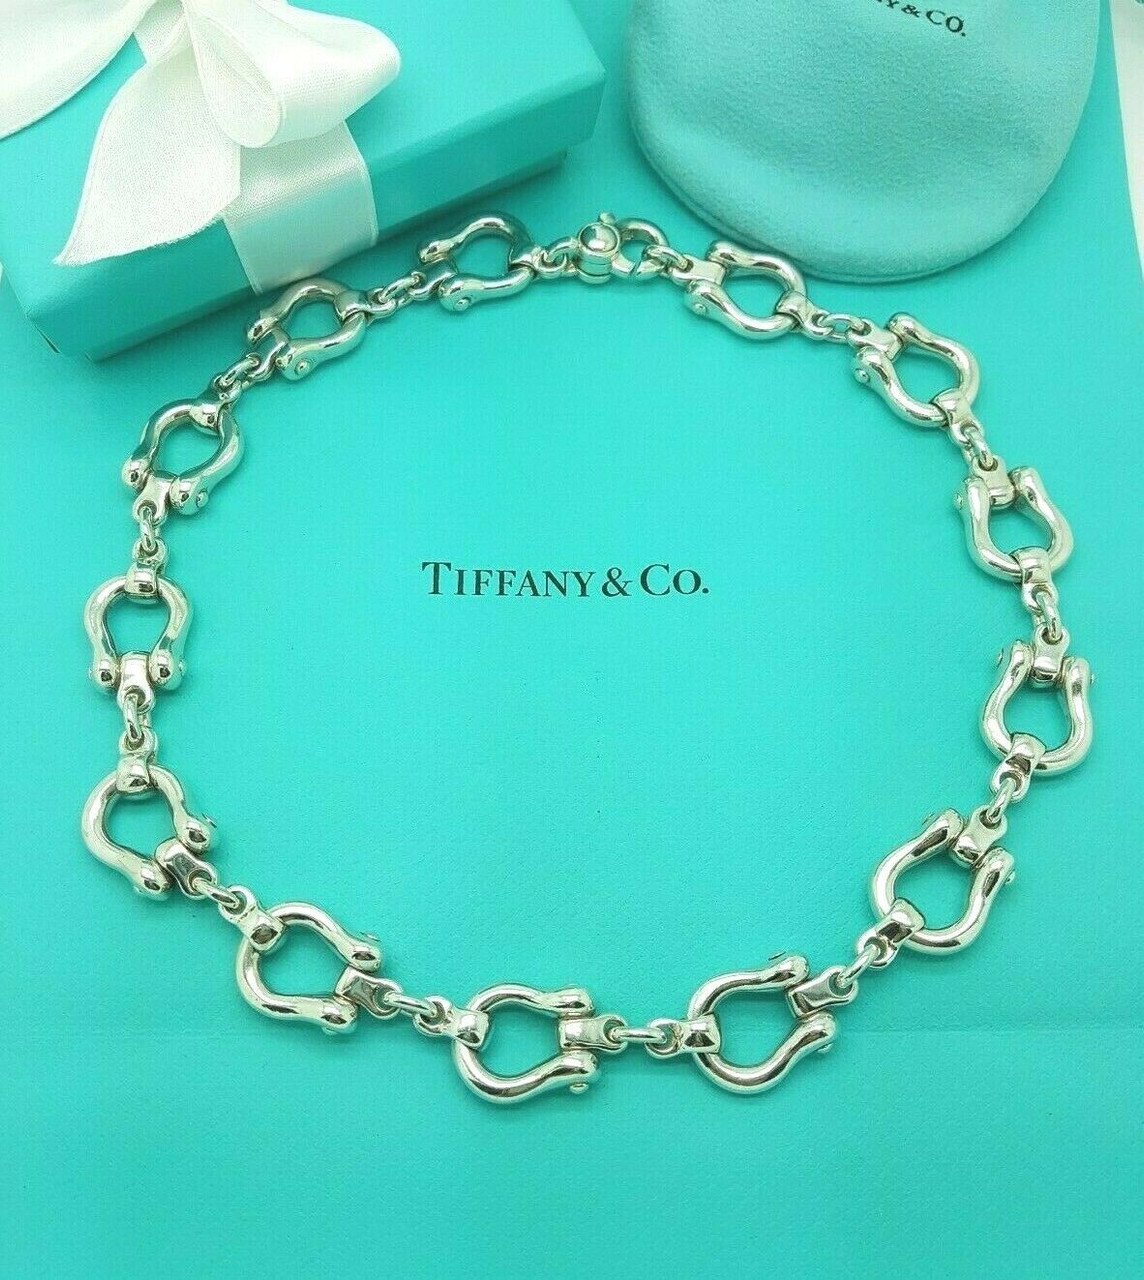 Tiffany & Co. Horseshoe Link Necklace in Sterling Silver – 31 Jewels Inc.